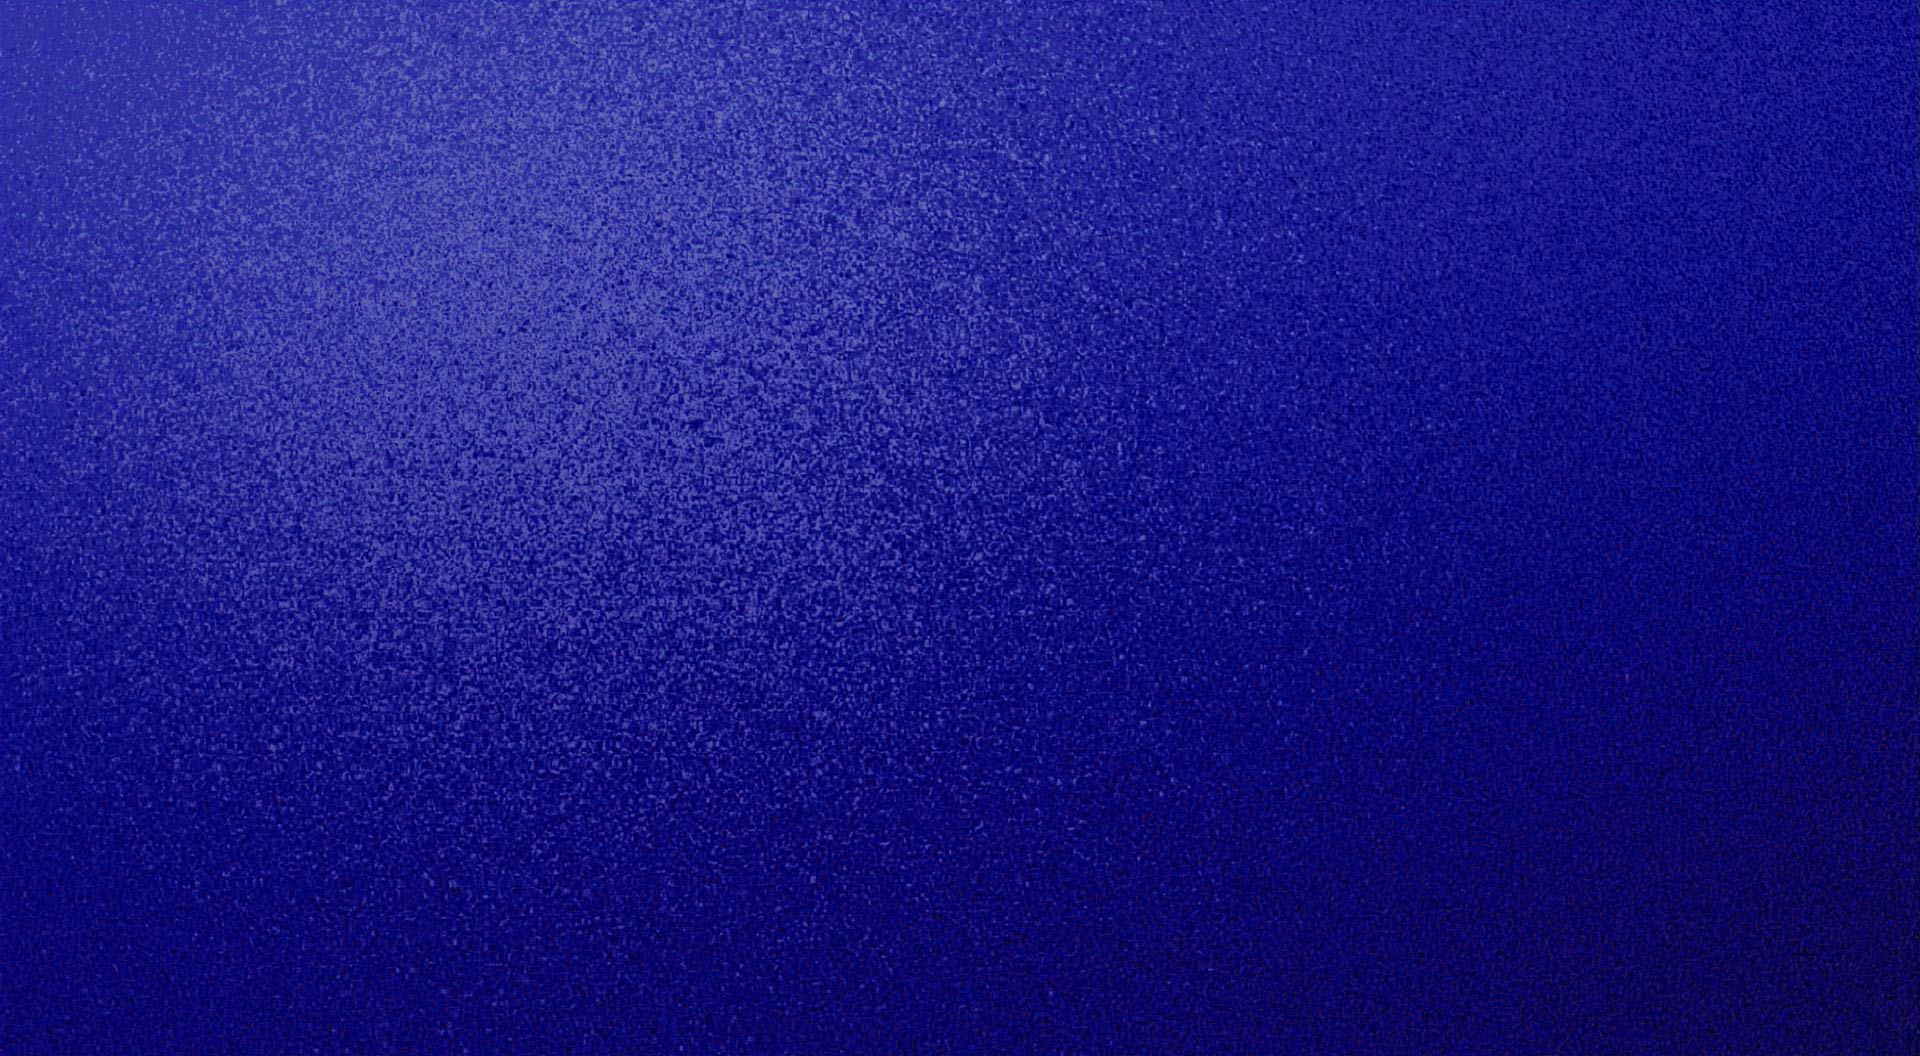 Is Under The Blue Wallpaper Category Of HD Navy